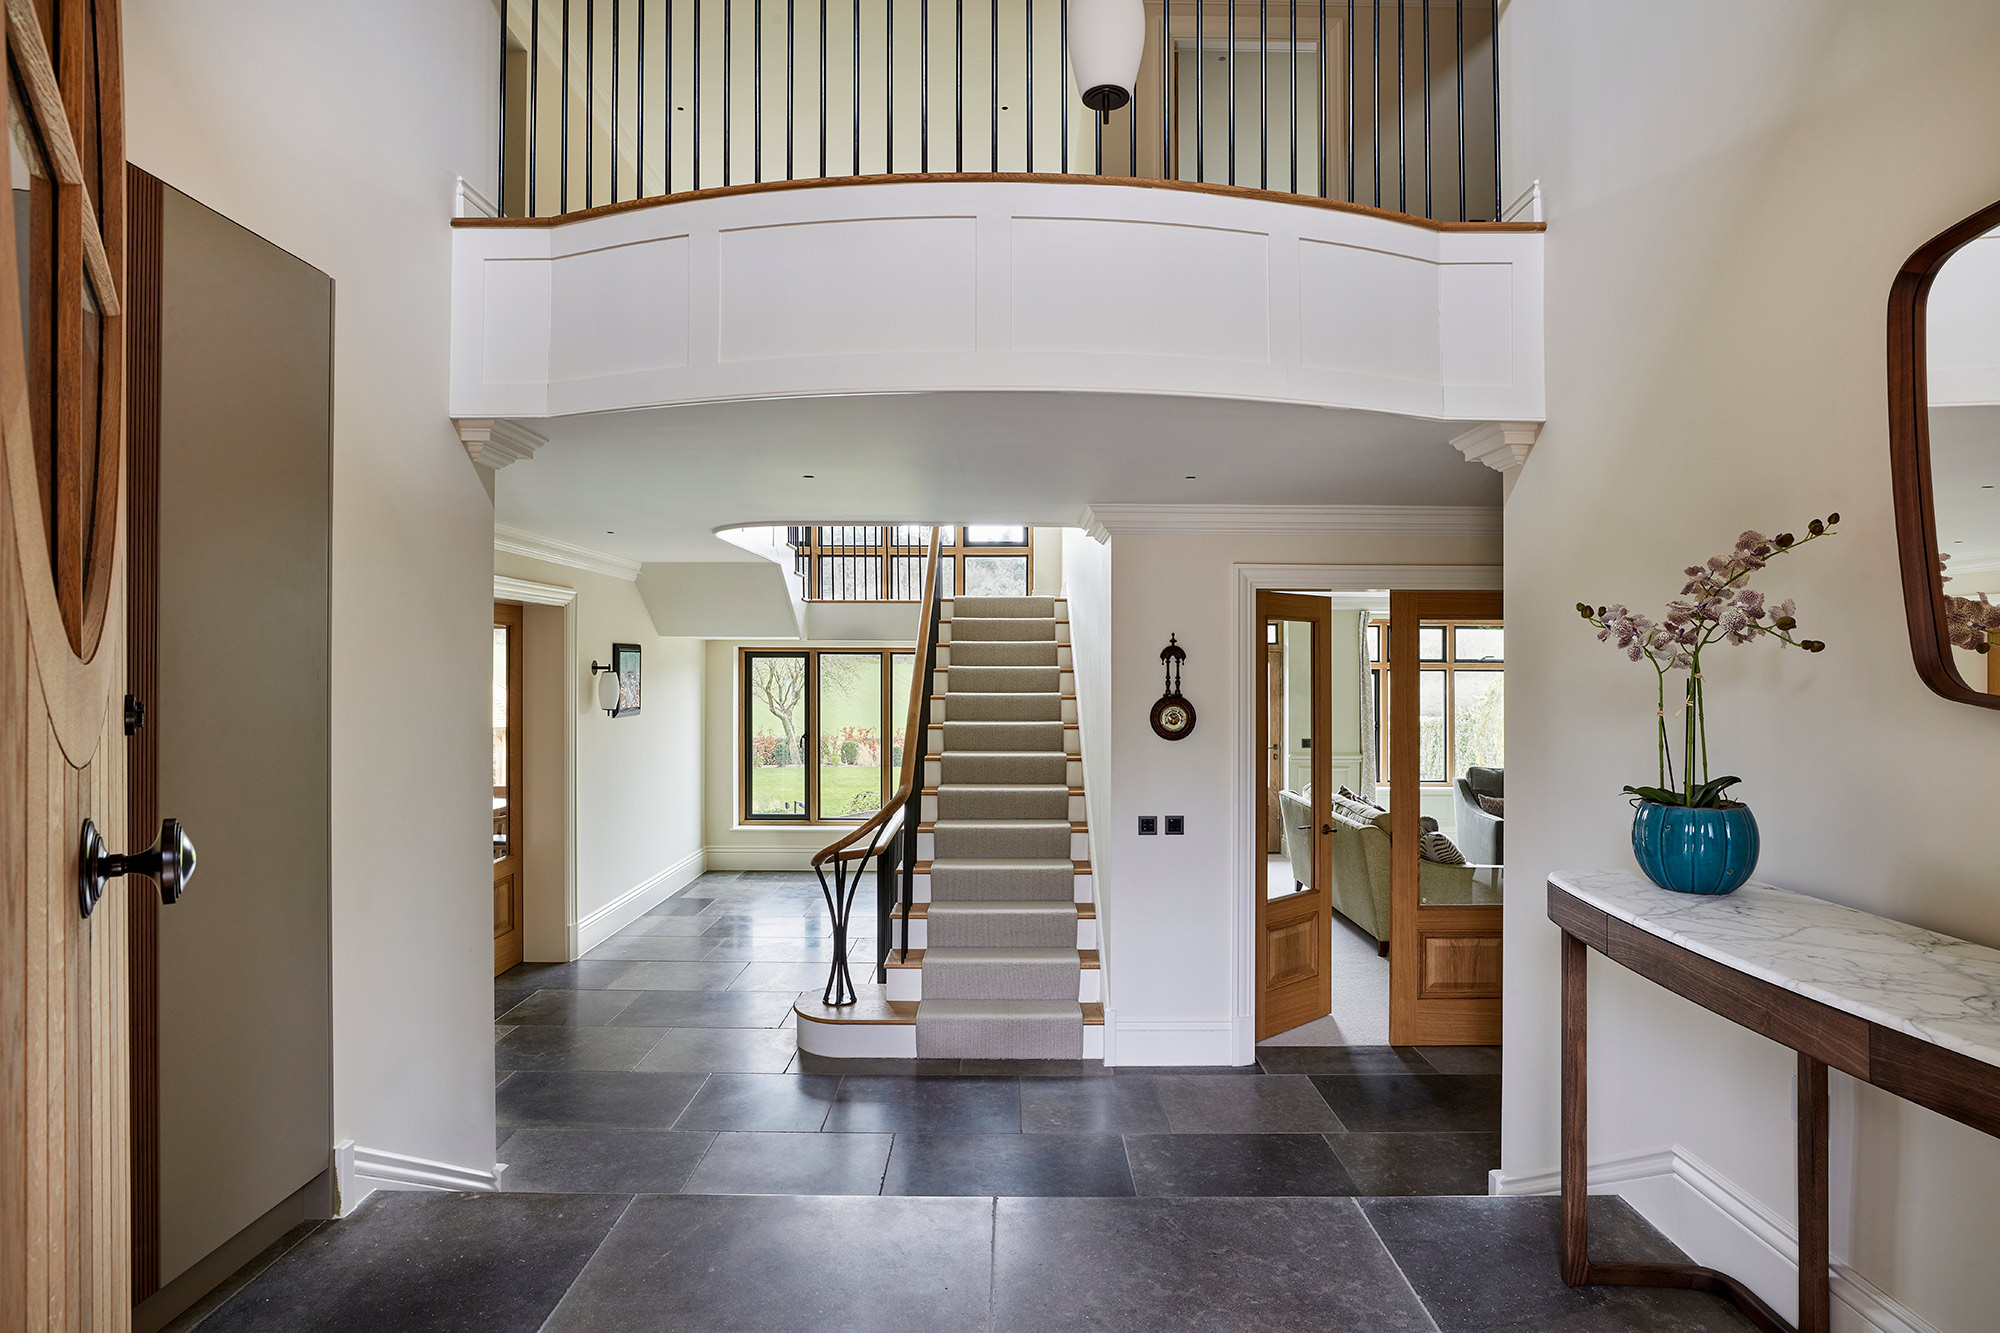 Hallway view towards stairs - New build by KM Grant Surrey